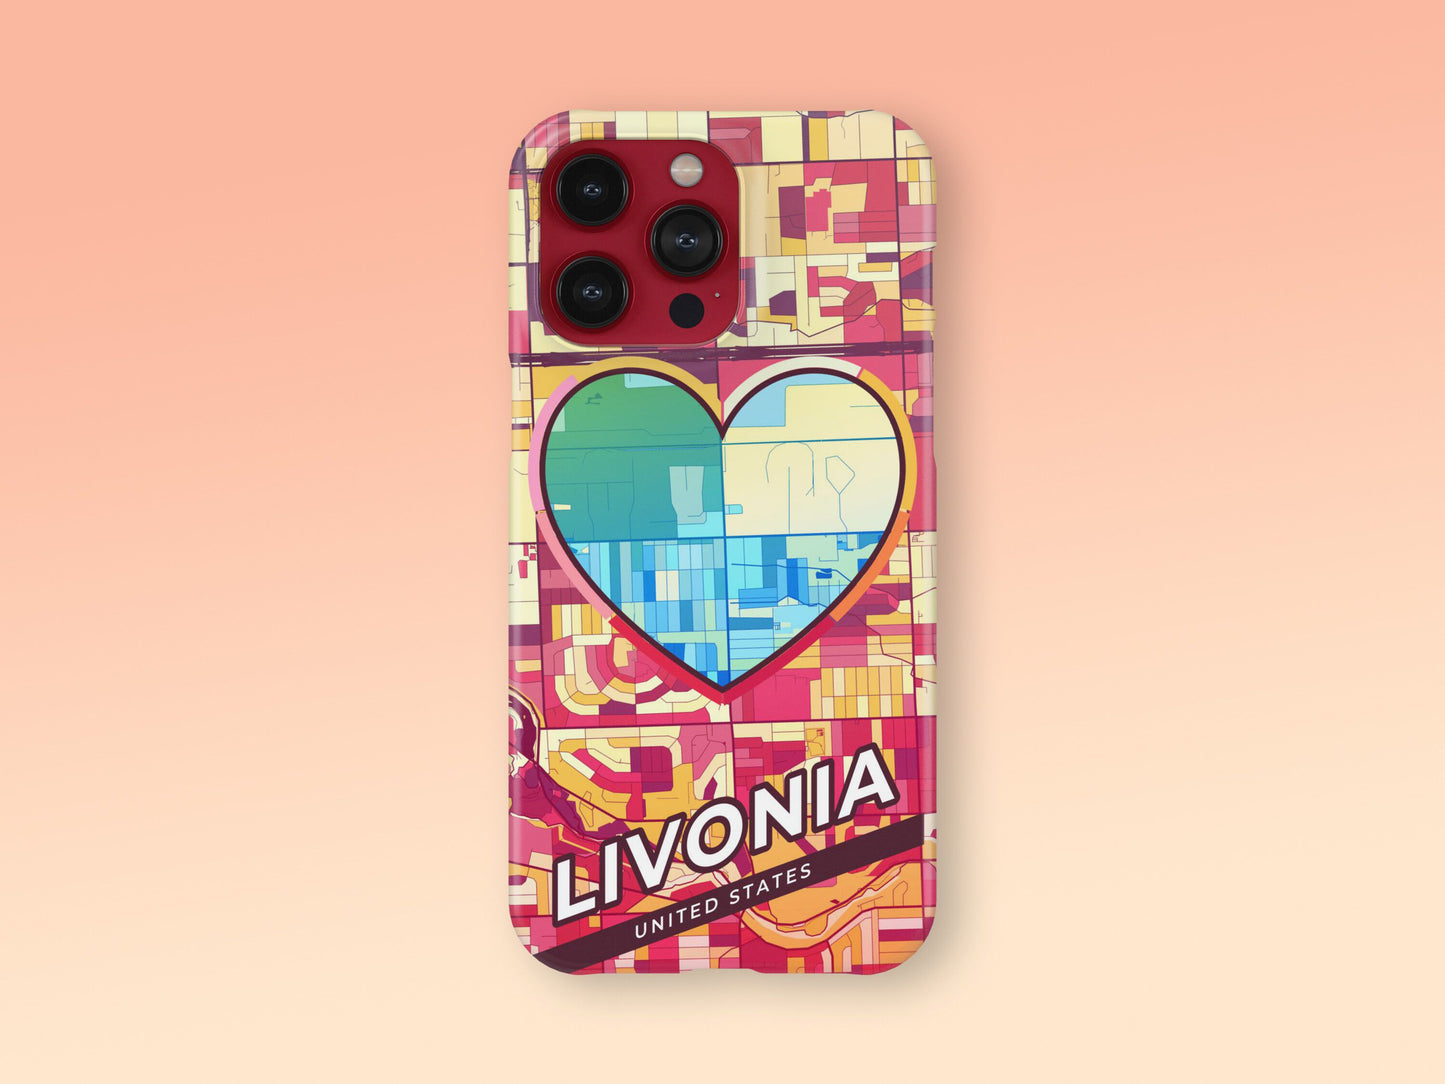 Livonia Michigan slim phone case with colorful icon. Birthday, wedding or housewarming gift. Couple match cases. 2